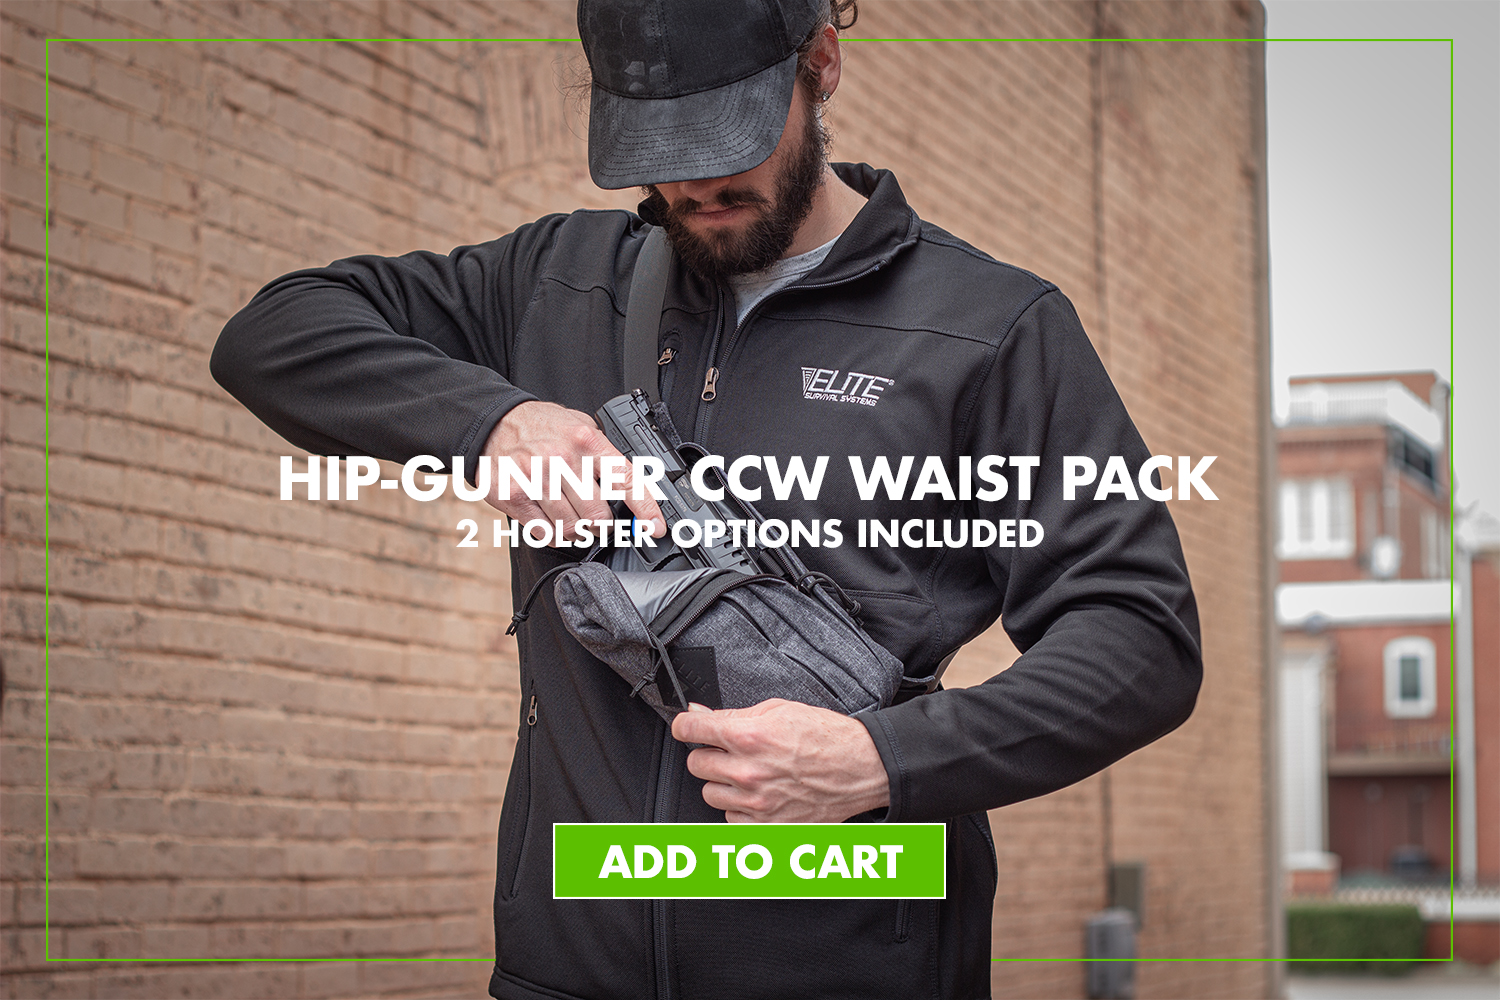 Hip Gunner Concealed Carry Fanny Pack - Keep your firearm close and accessible